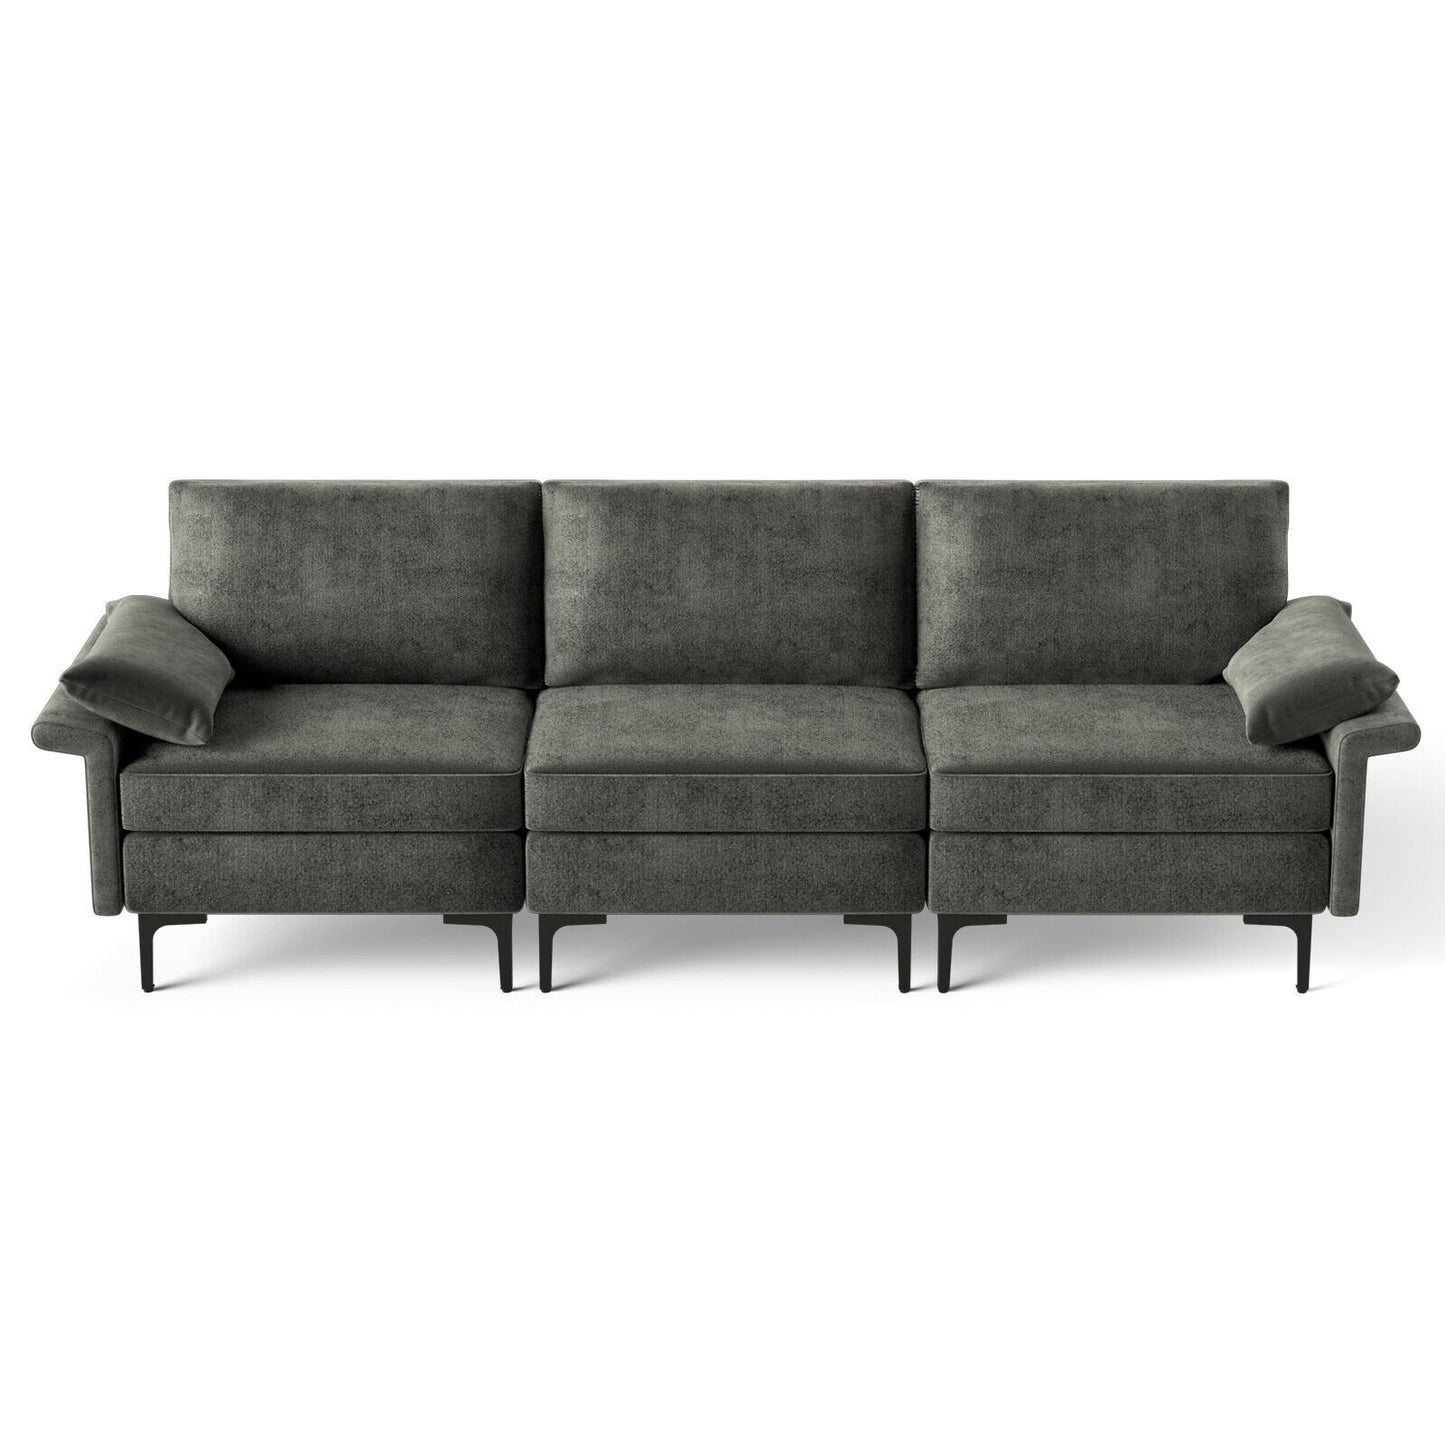 Large 3-Seat Sofa Sectional with Metal Legs for 3-4 people, Gray - Gallery Canada